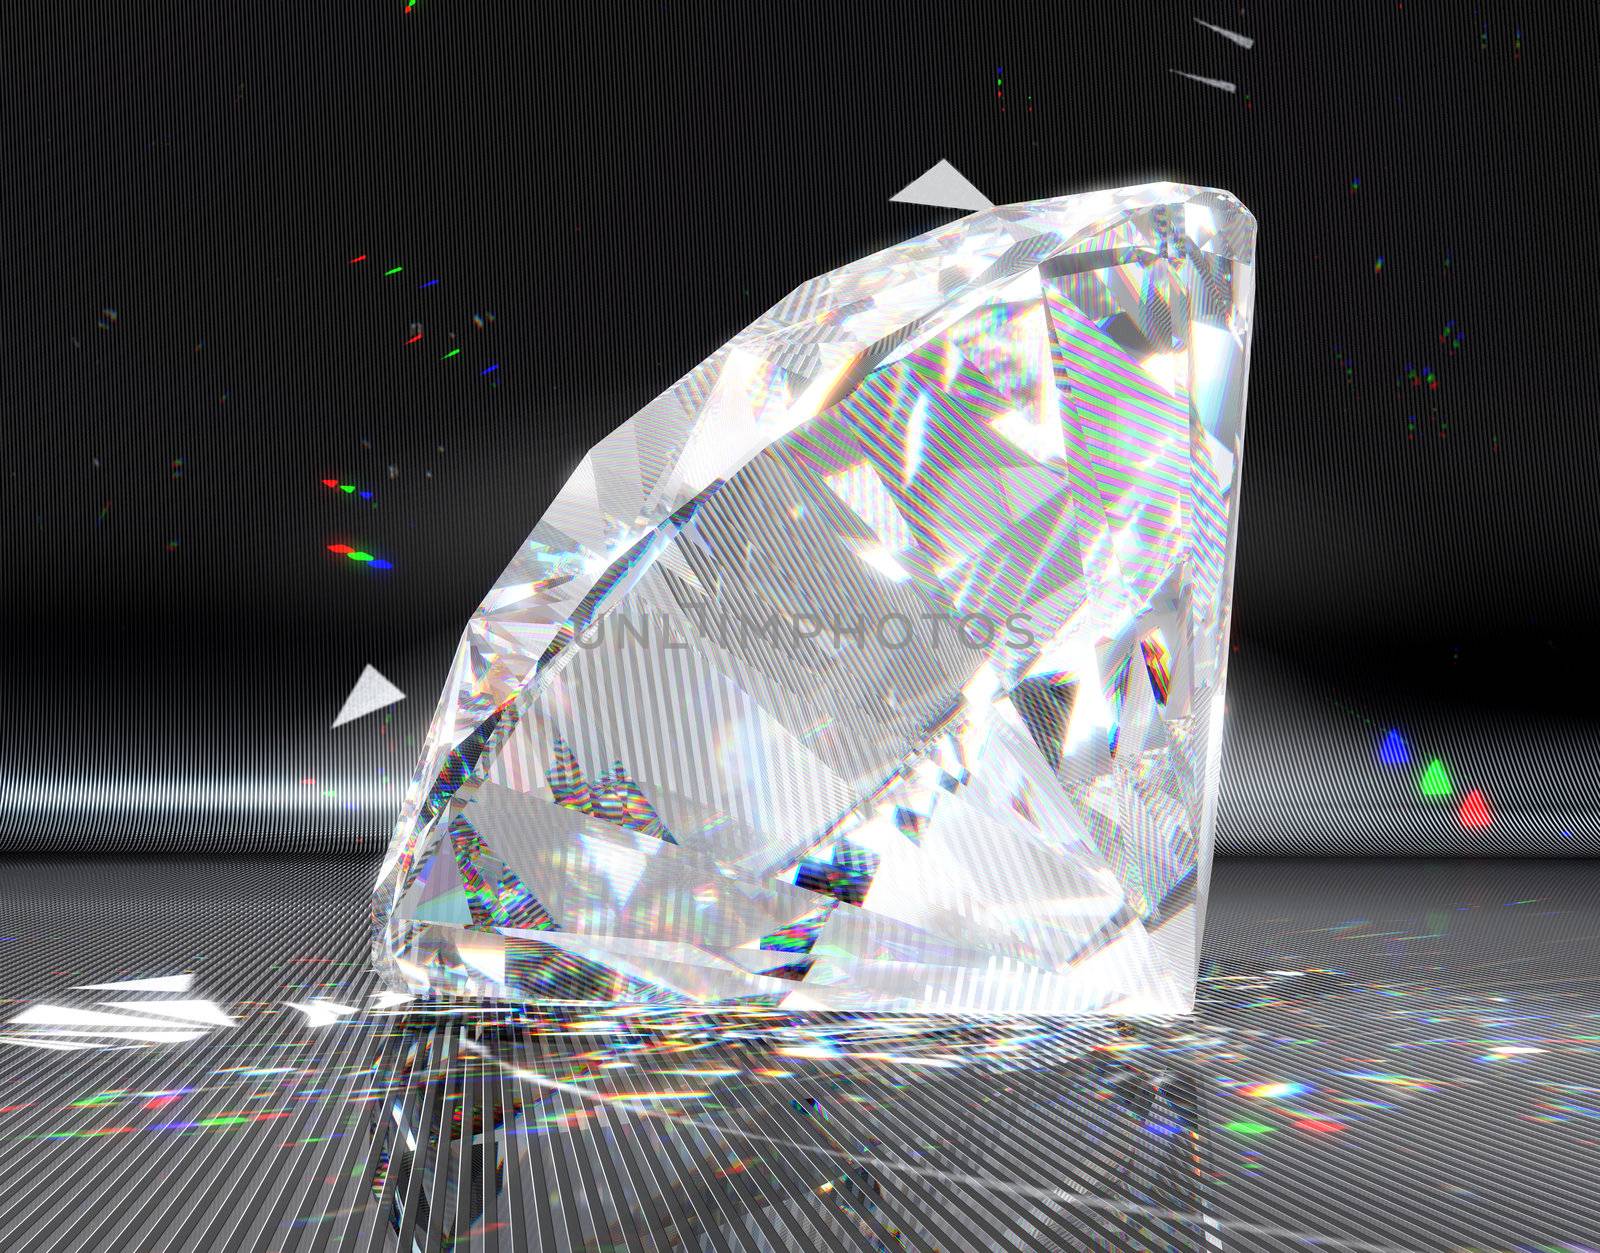 Large diamond with striped reflection and sparkles over metallic background